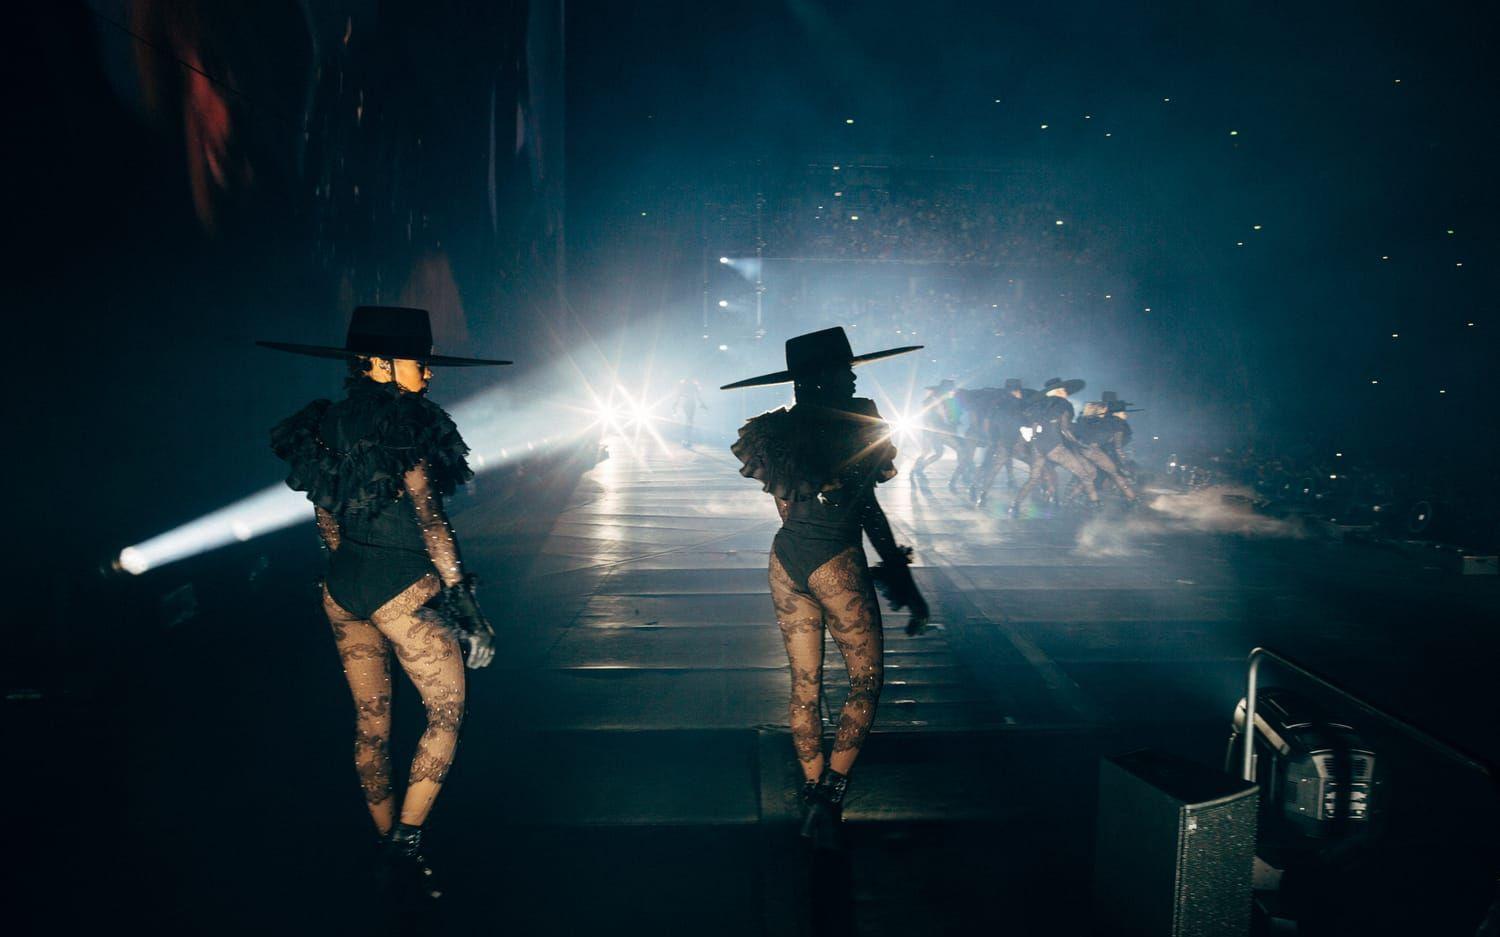 World Formation Tour på Friends arena. Foto: Andrew White/Invision for Parkwood Entertainment/AP Images.